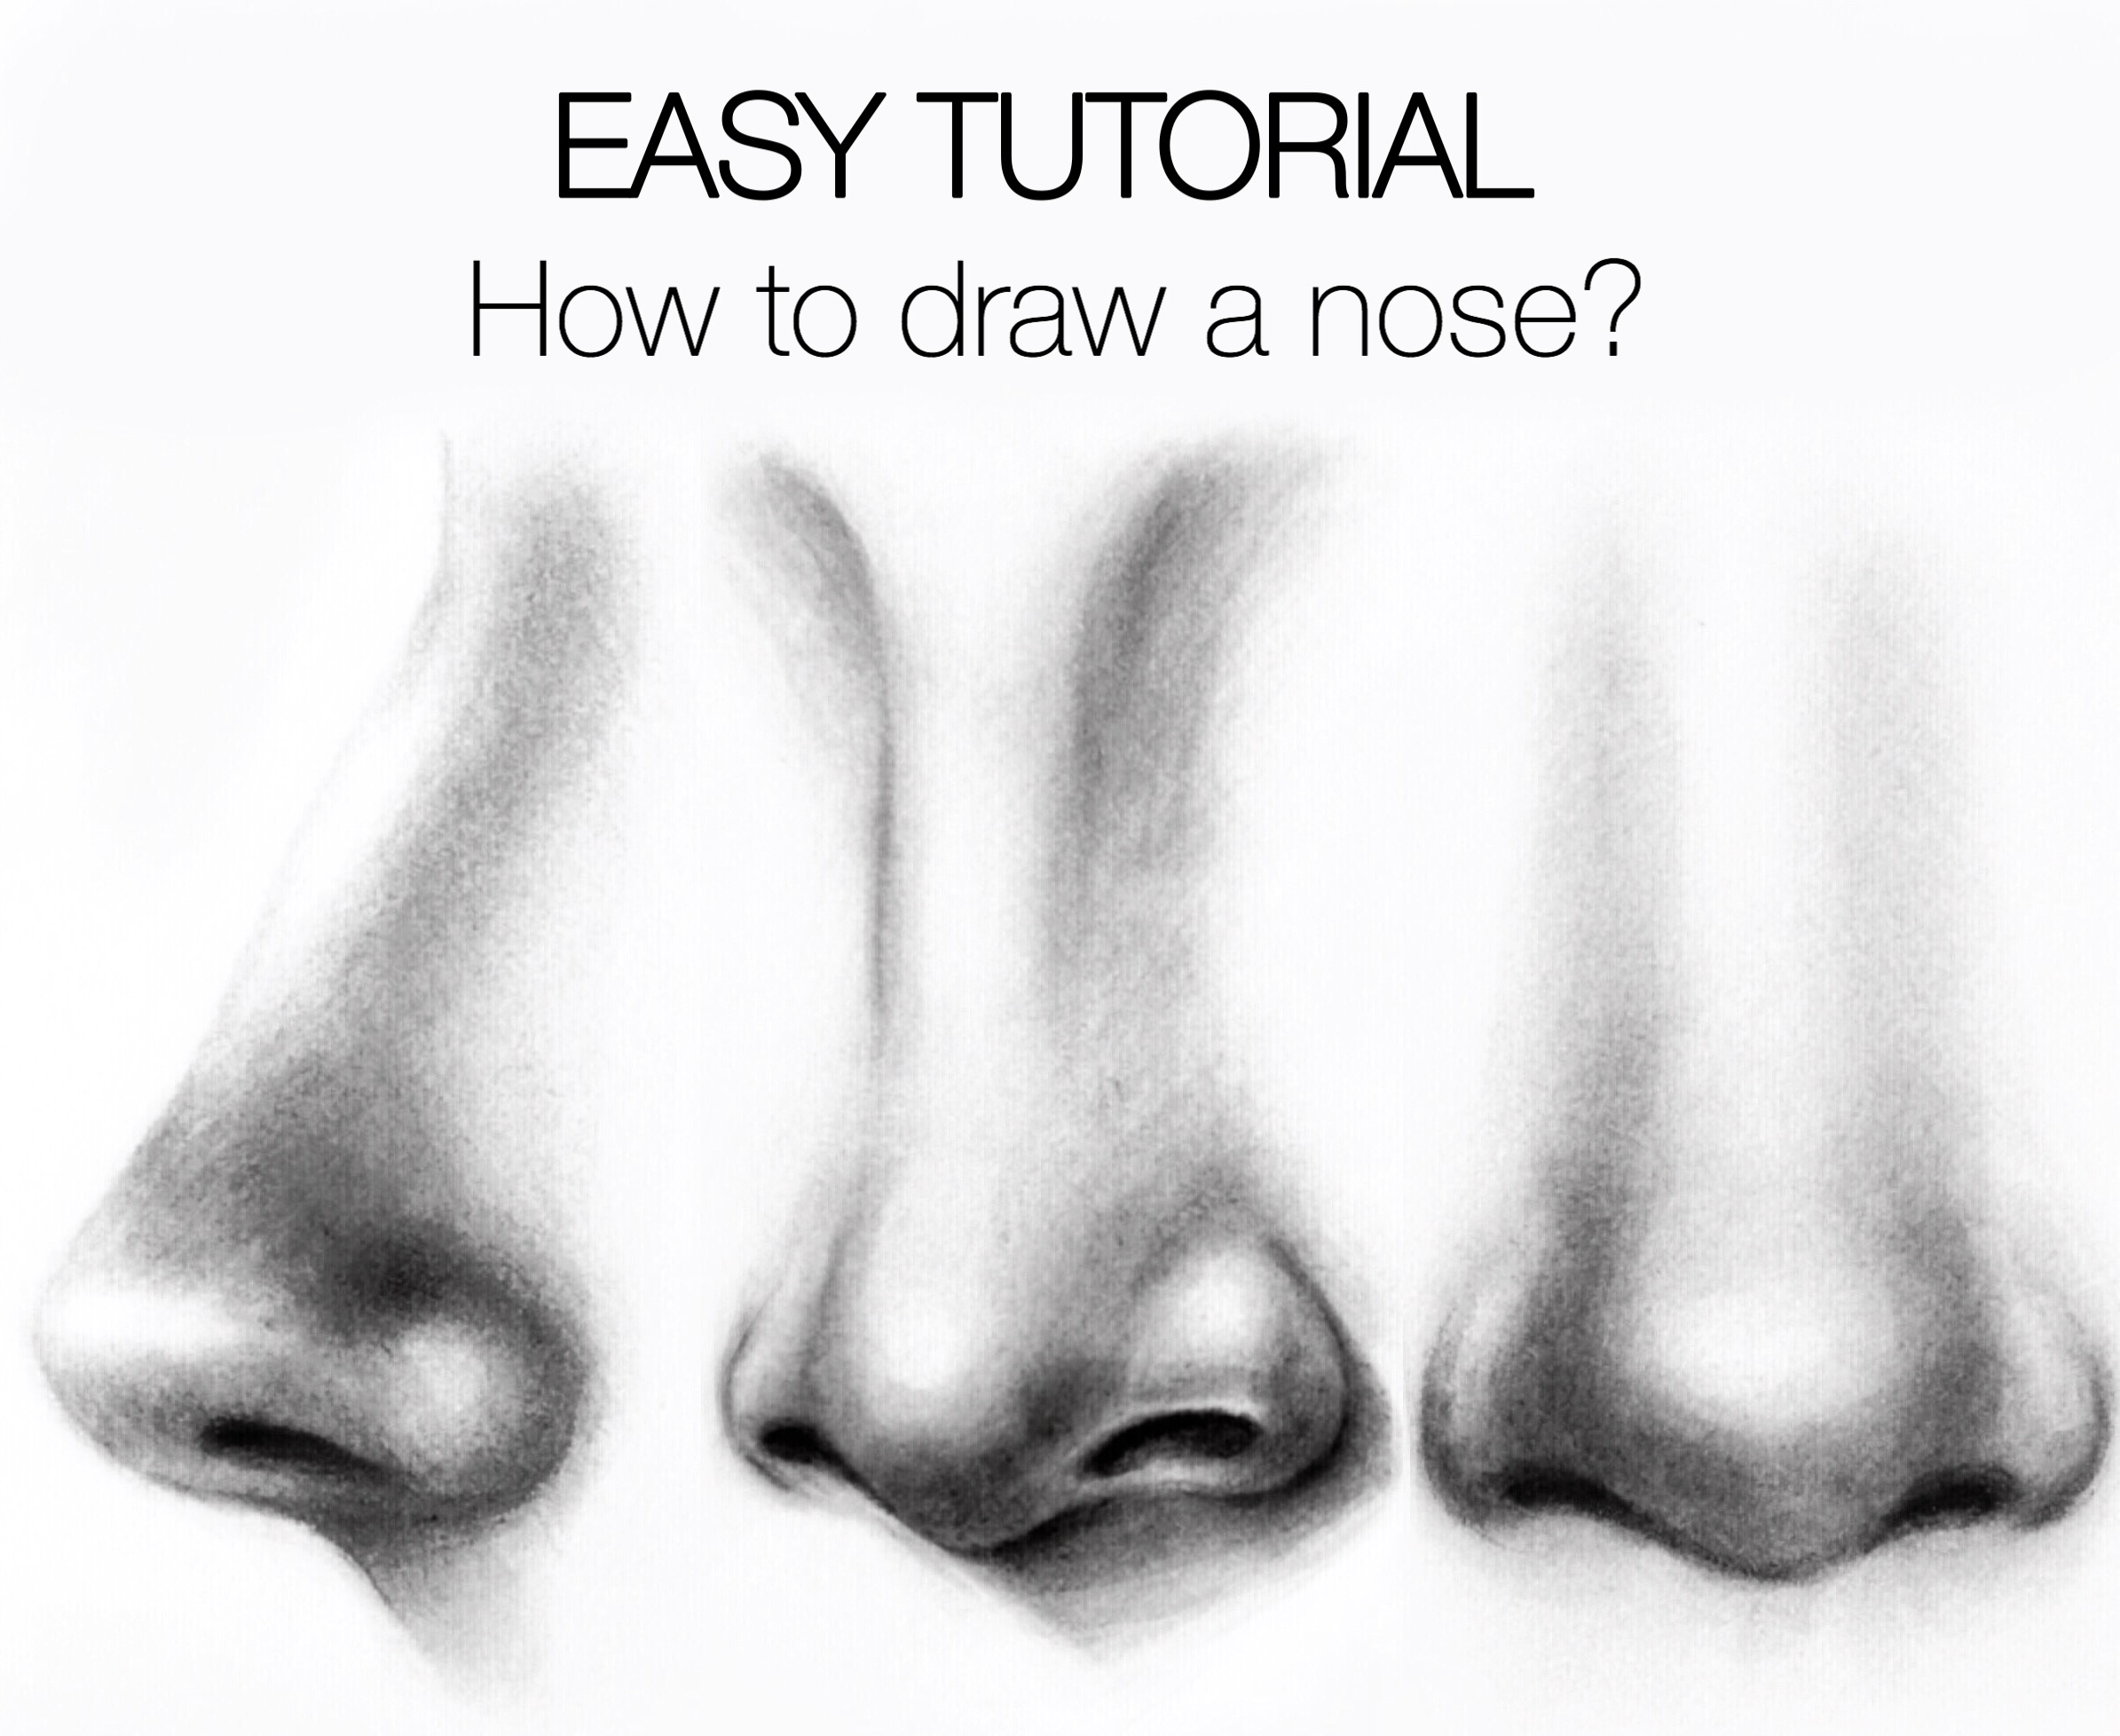 How To Draw A Nose Step By Step Easily For Beginners